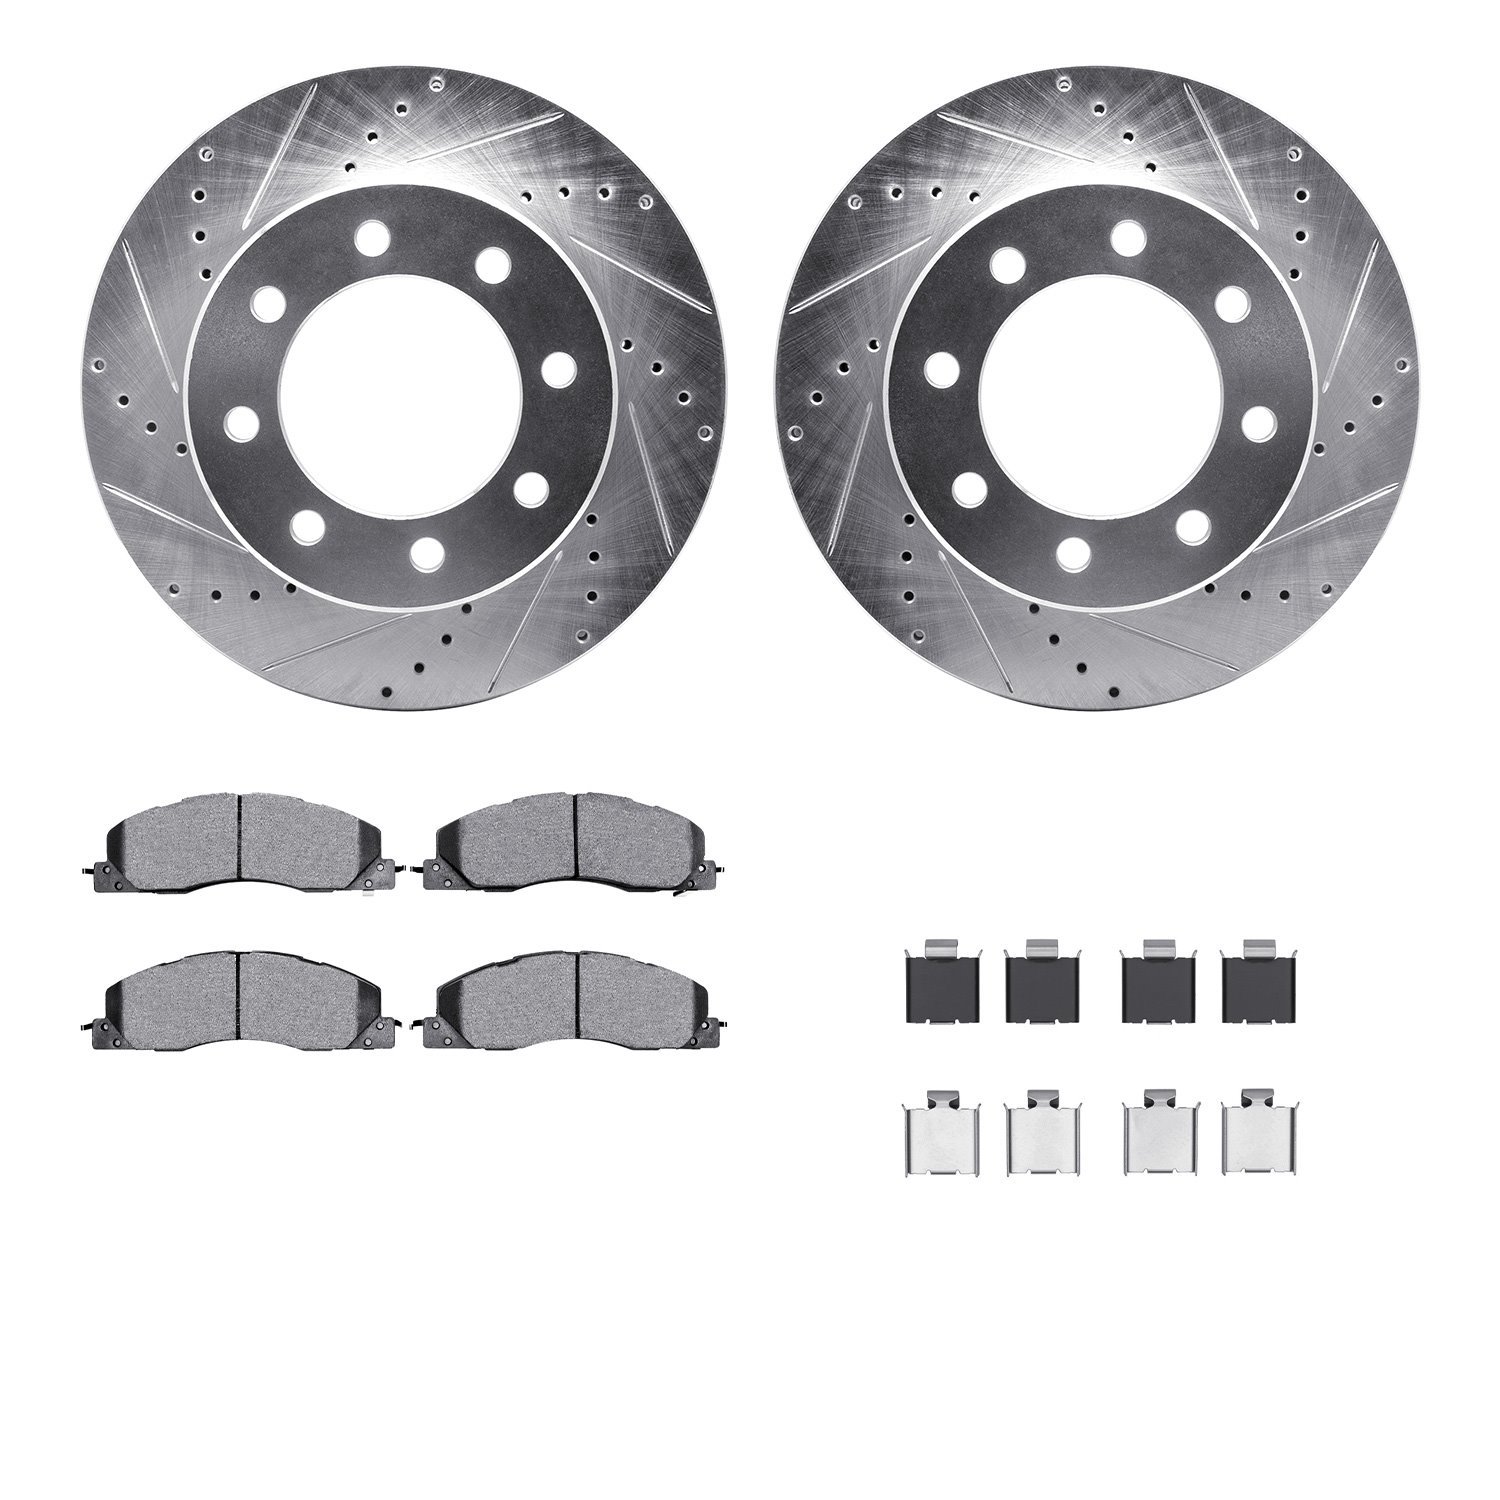 7412-40021 Drilled/Slotted Brake Rotors with Ultimate-Duty Brake Pads Kit & Hardware [Silver], 2009-2018 Mopar, Position: Front